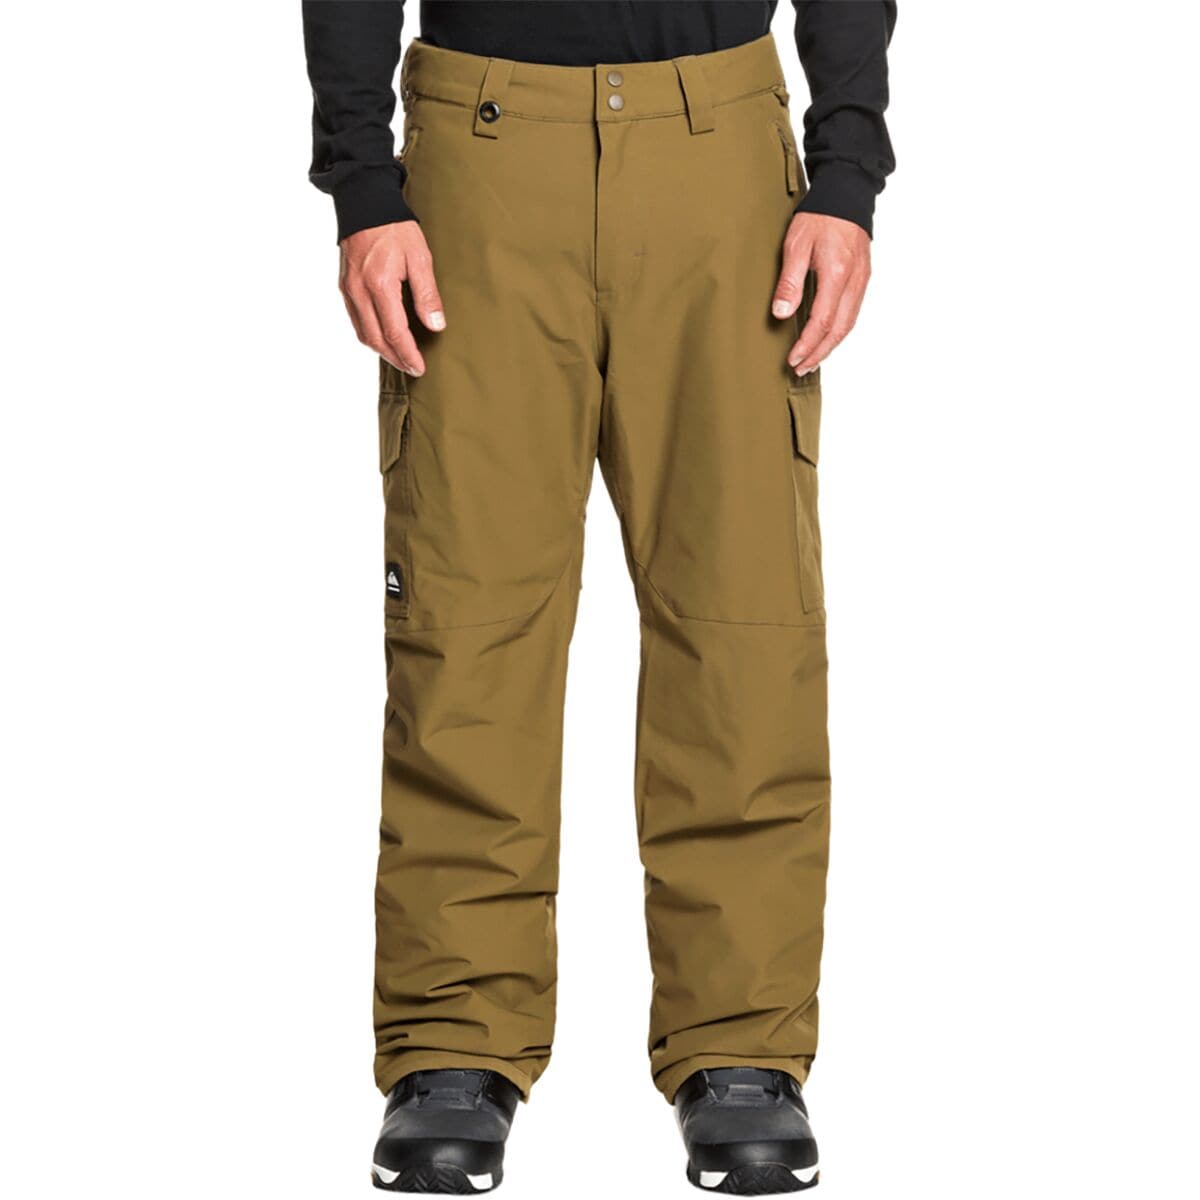 Quiksilver Porter Insulated Pant - Men's Military Olive